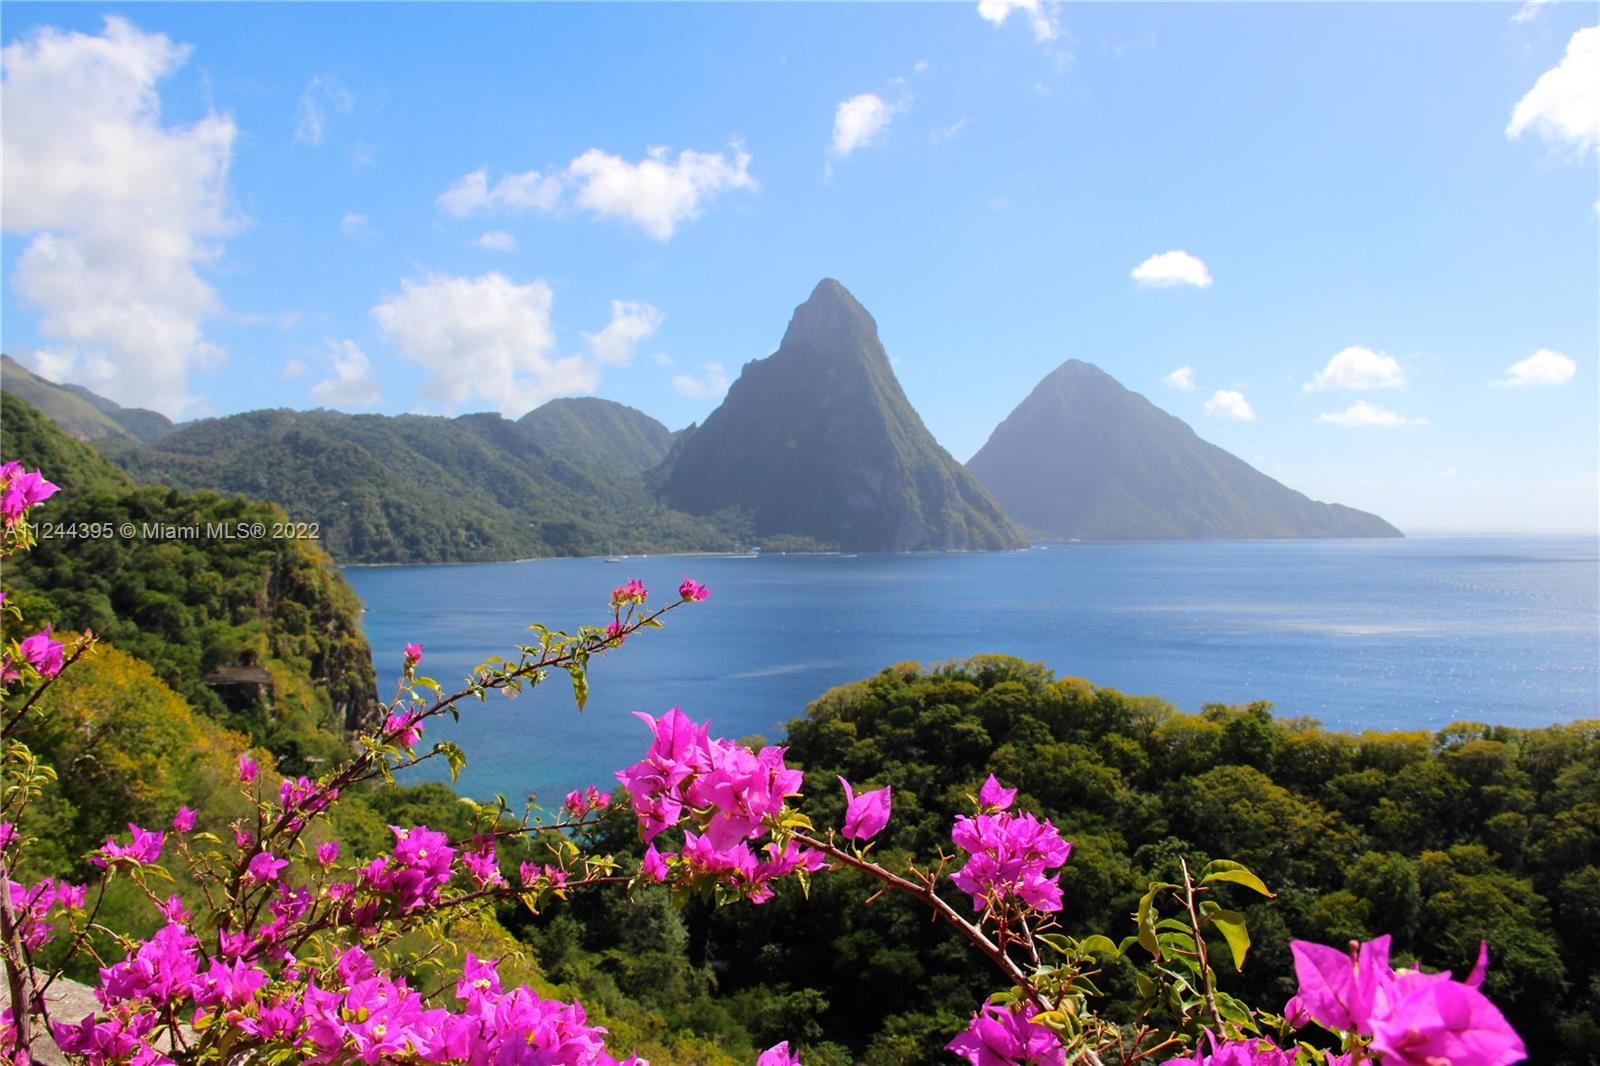 The renown pitons of the St. Lucian coastline.